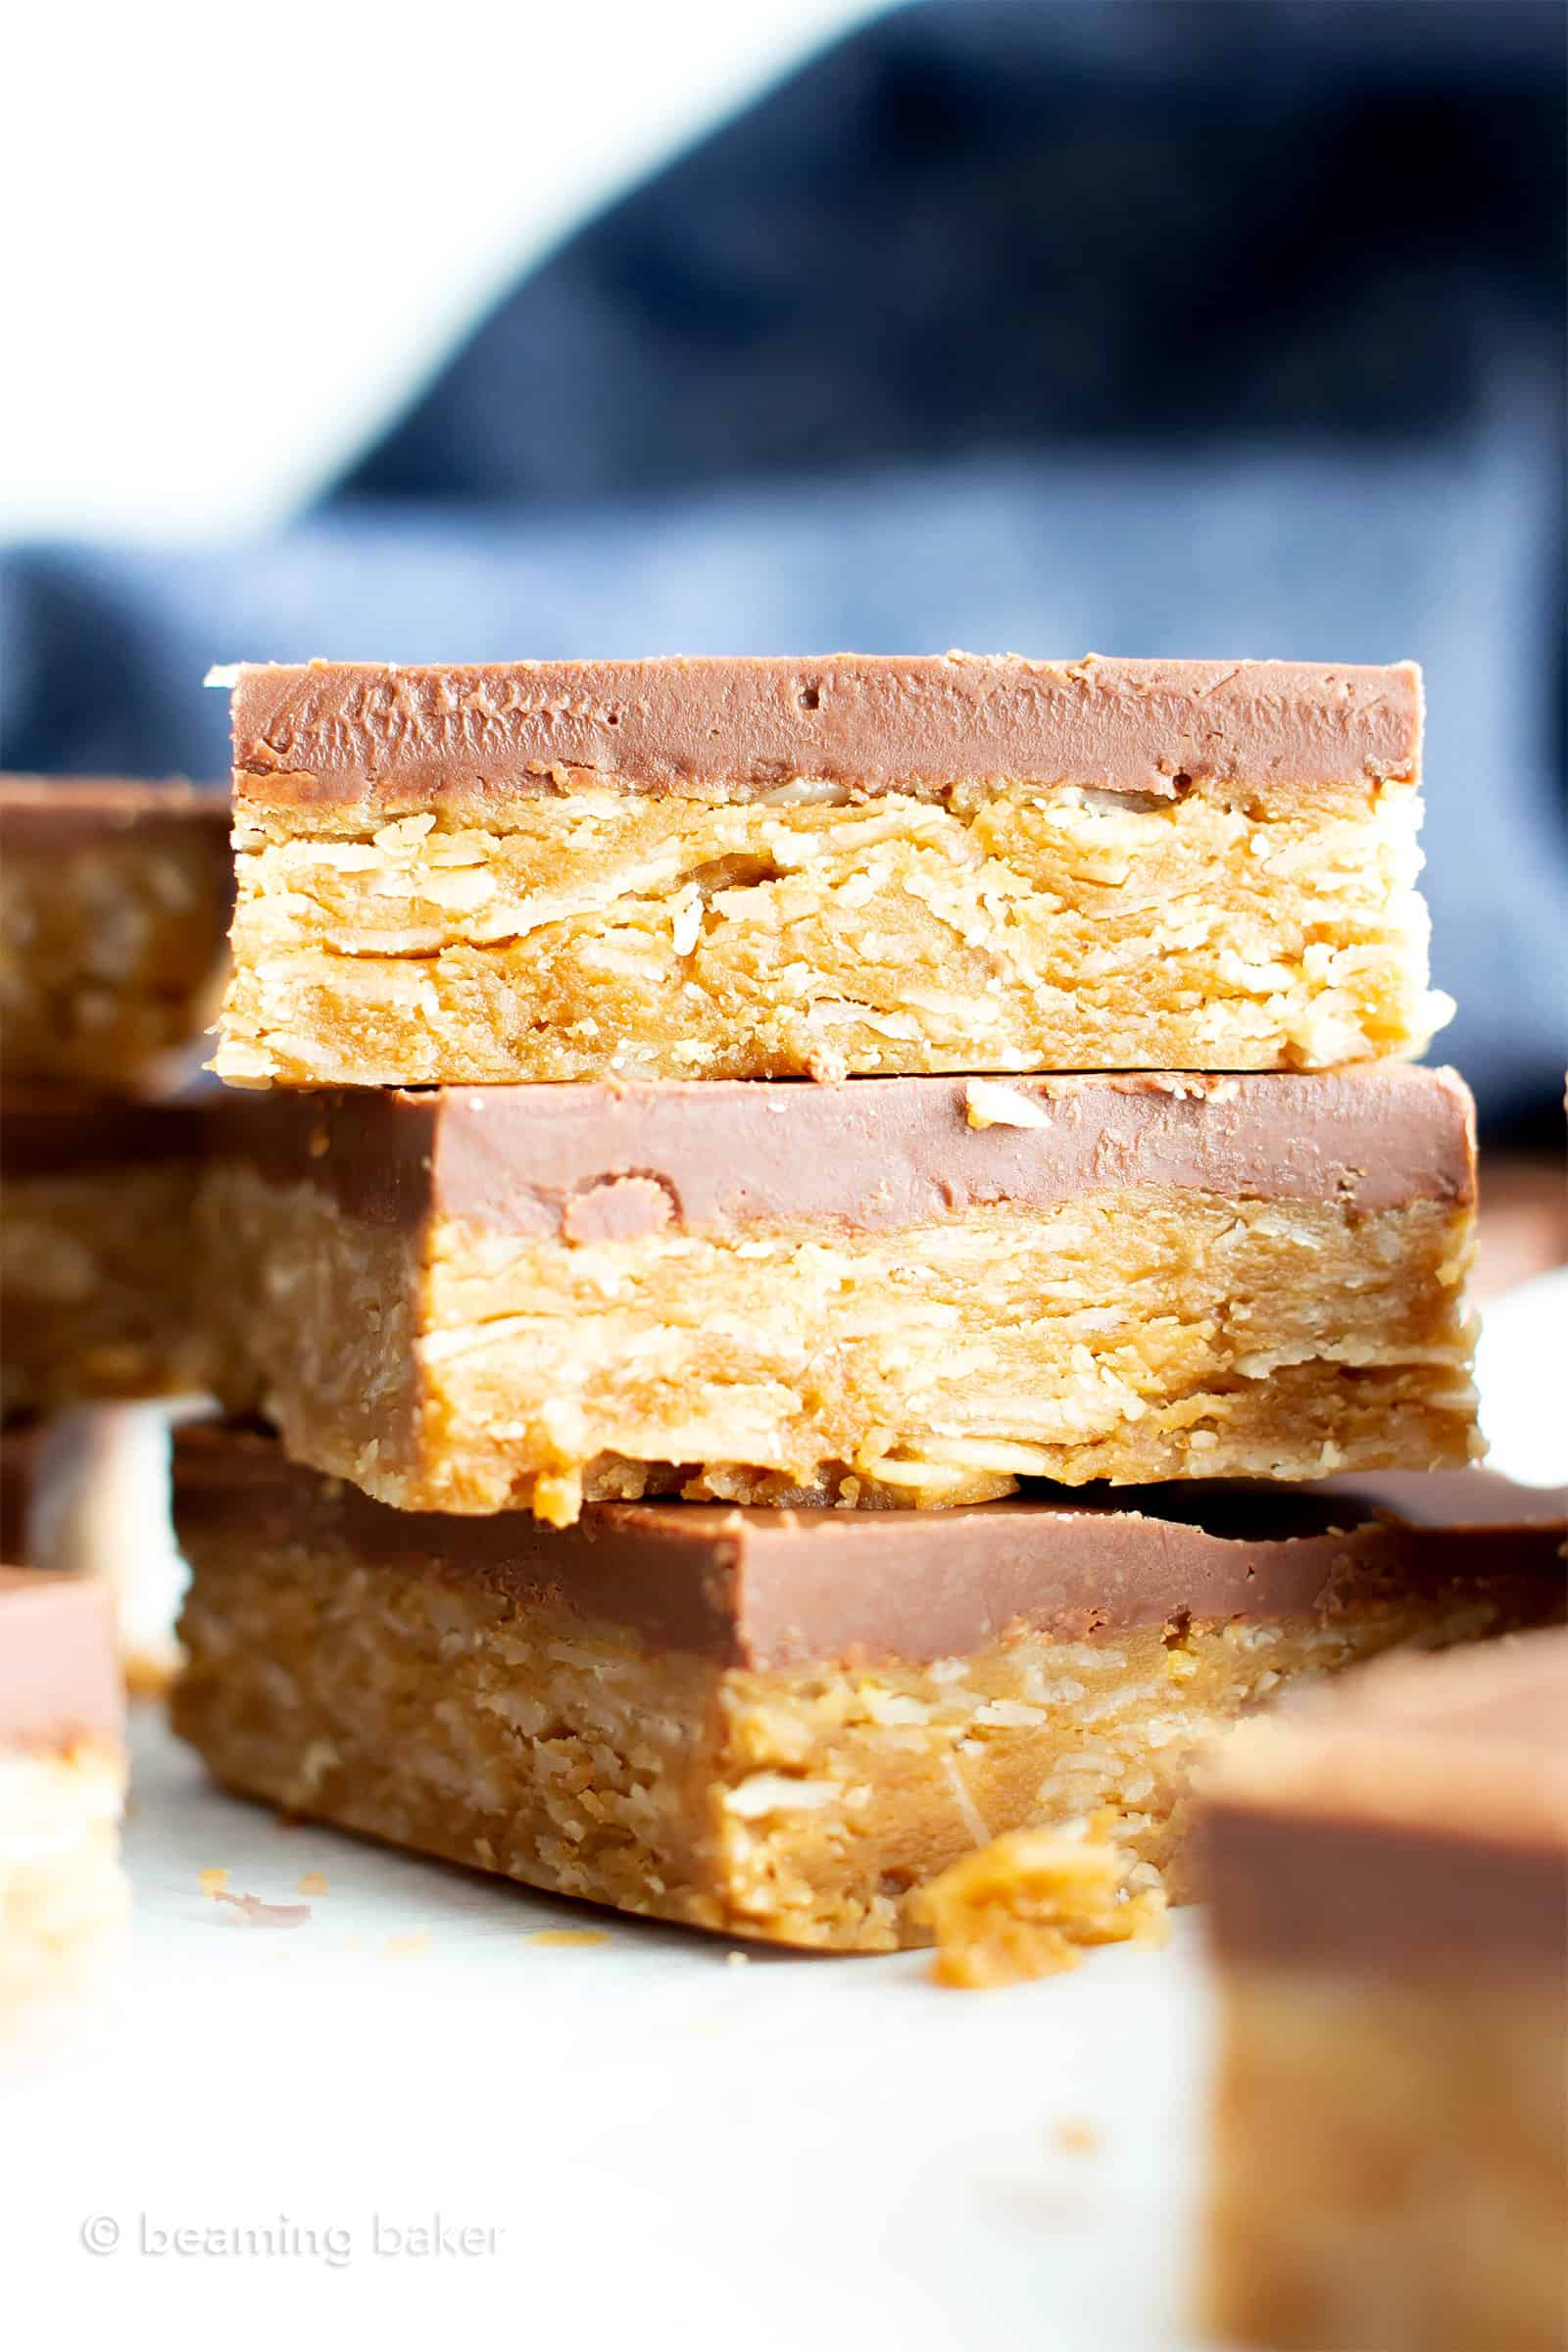 4 Ingredient Healthy No Bake Peanut Butter Cup Oat Bars: this vegan peanut butter oatmeal bars recipe is so easy to make & tastes like peanut butter cups! Chewy peanut butter oatmeal bars with a thick, chocolate topping. #Vegan #GlutenFree #Healthy #PeanutButter #Oats #Oatmeal | Recipe at BeamingBaker.com